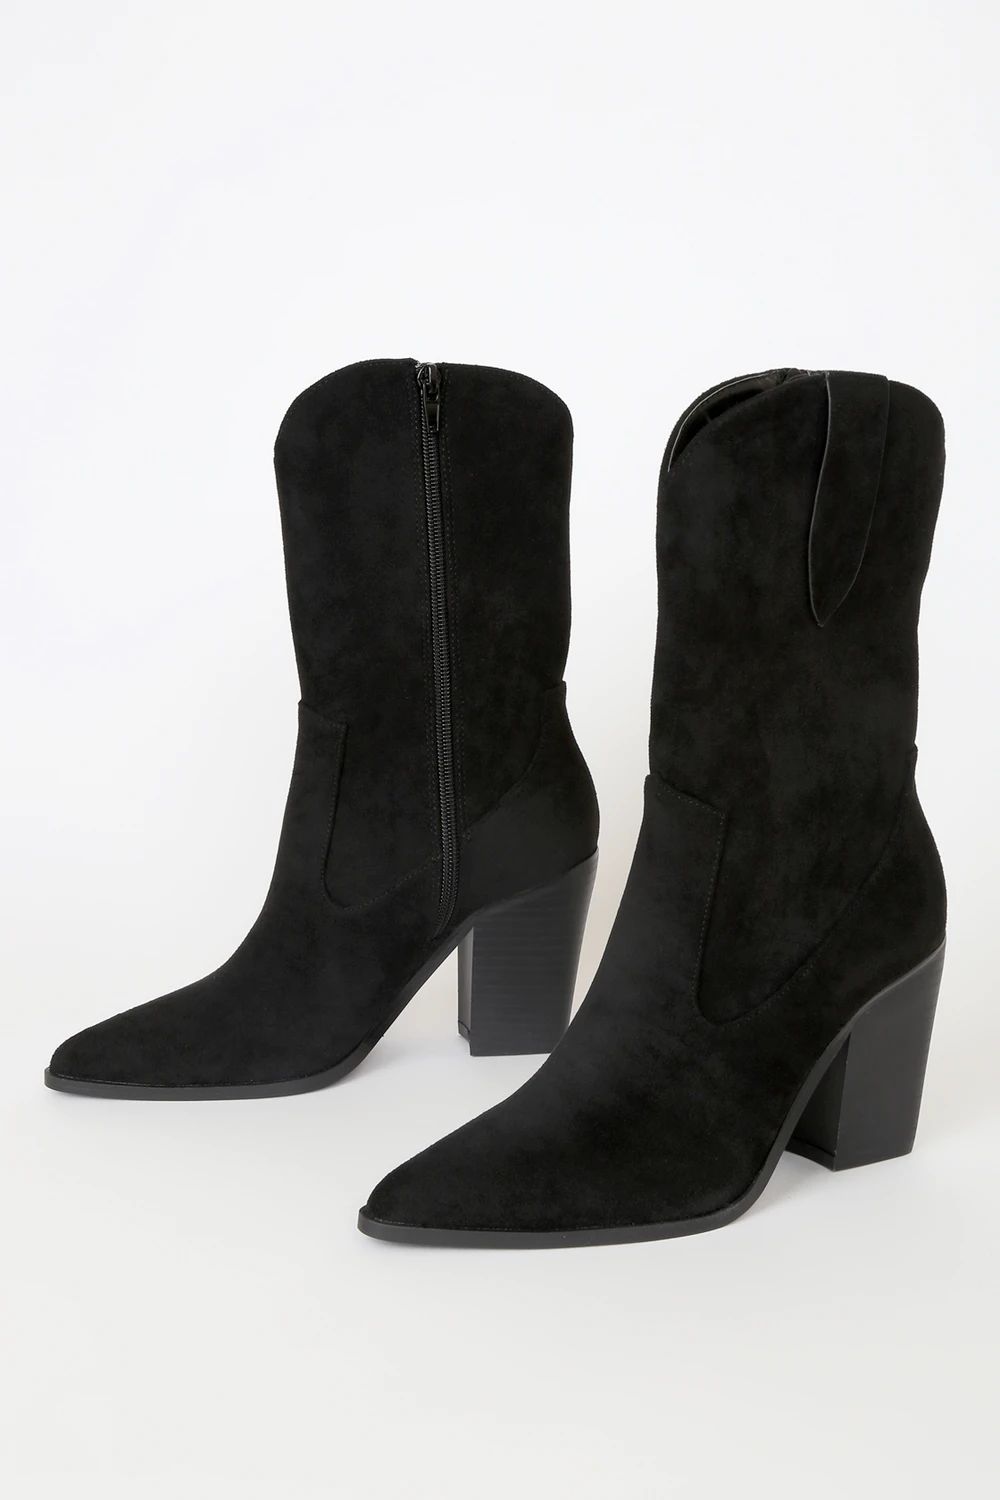 Levii Black Suede Mid-Calf Pointed-Toe Boots | Lulus (US)